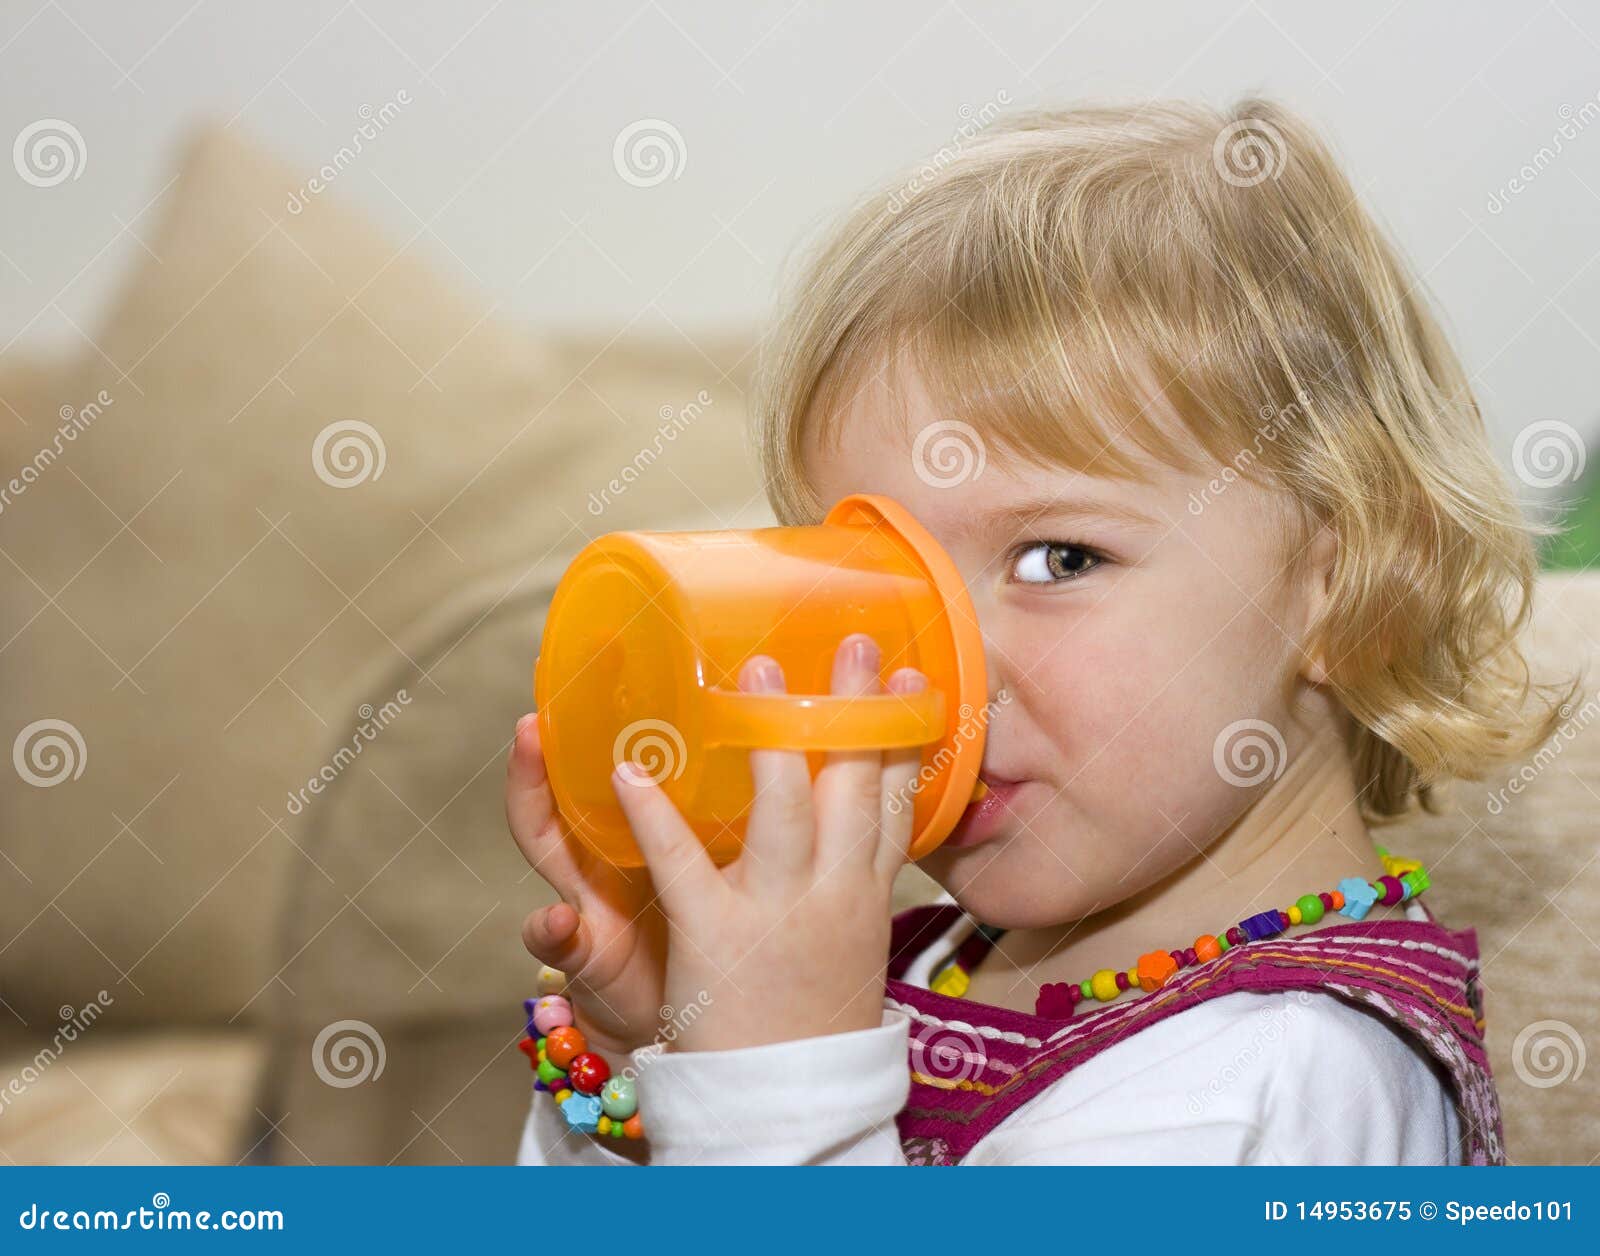 6,478 Toddler Drinking Cup Images, Stock Photos, 3D objects, & Vectors